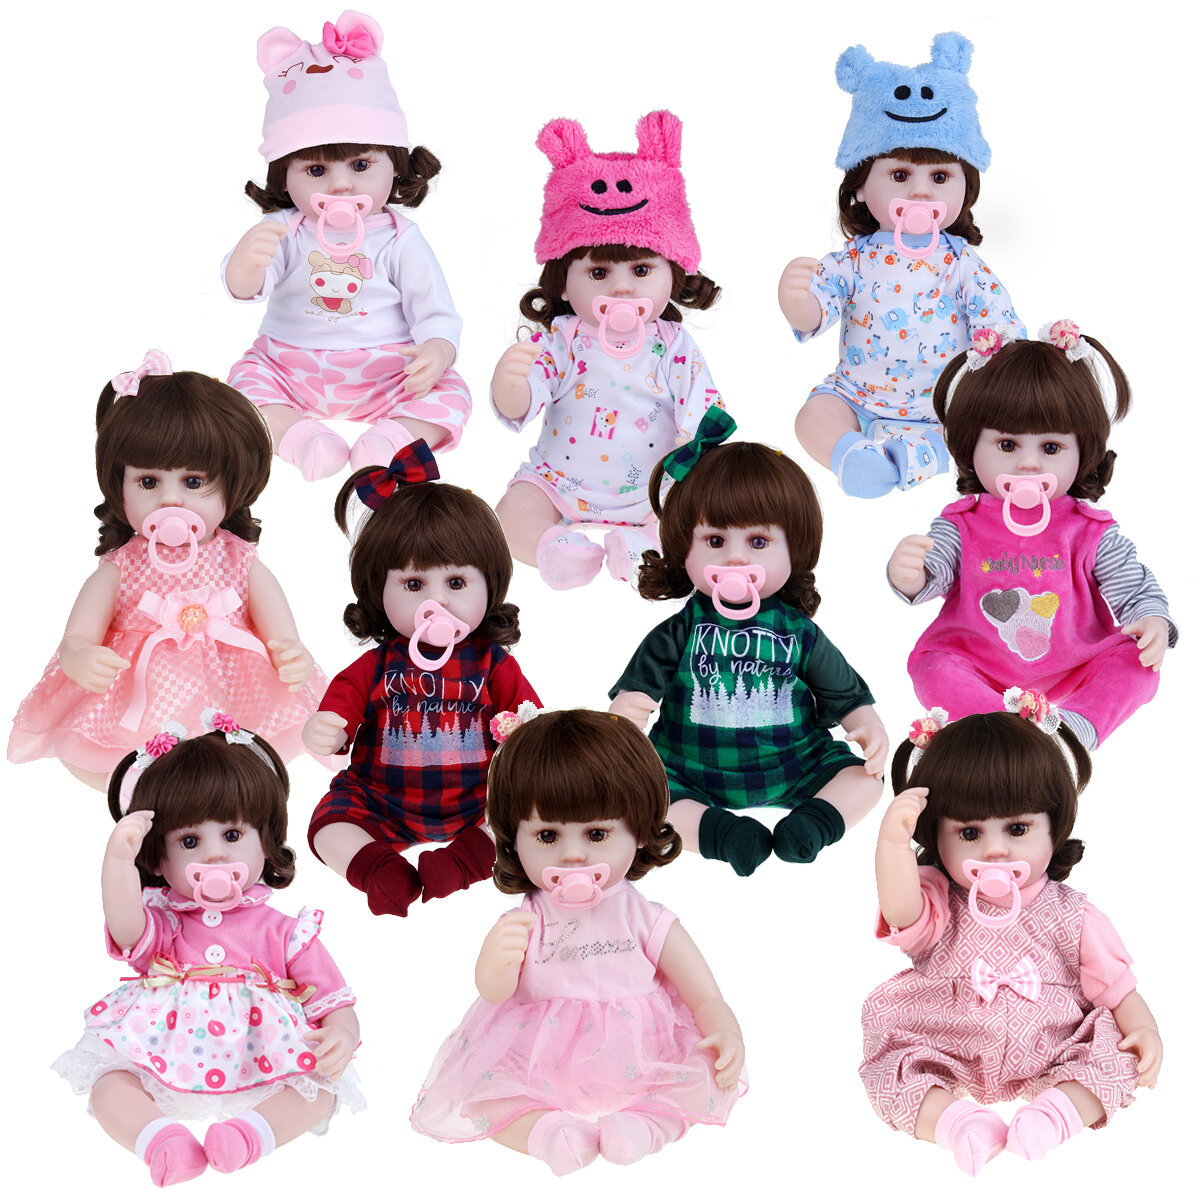 42CM Multi-optional Simulation Silicone Vinyl Lifelikes Realistic Baby Doll Toy with Cloth Suit for Kids Birthday Gift